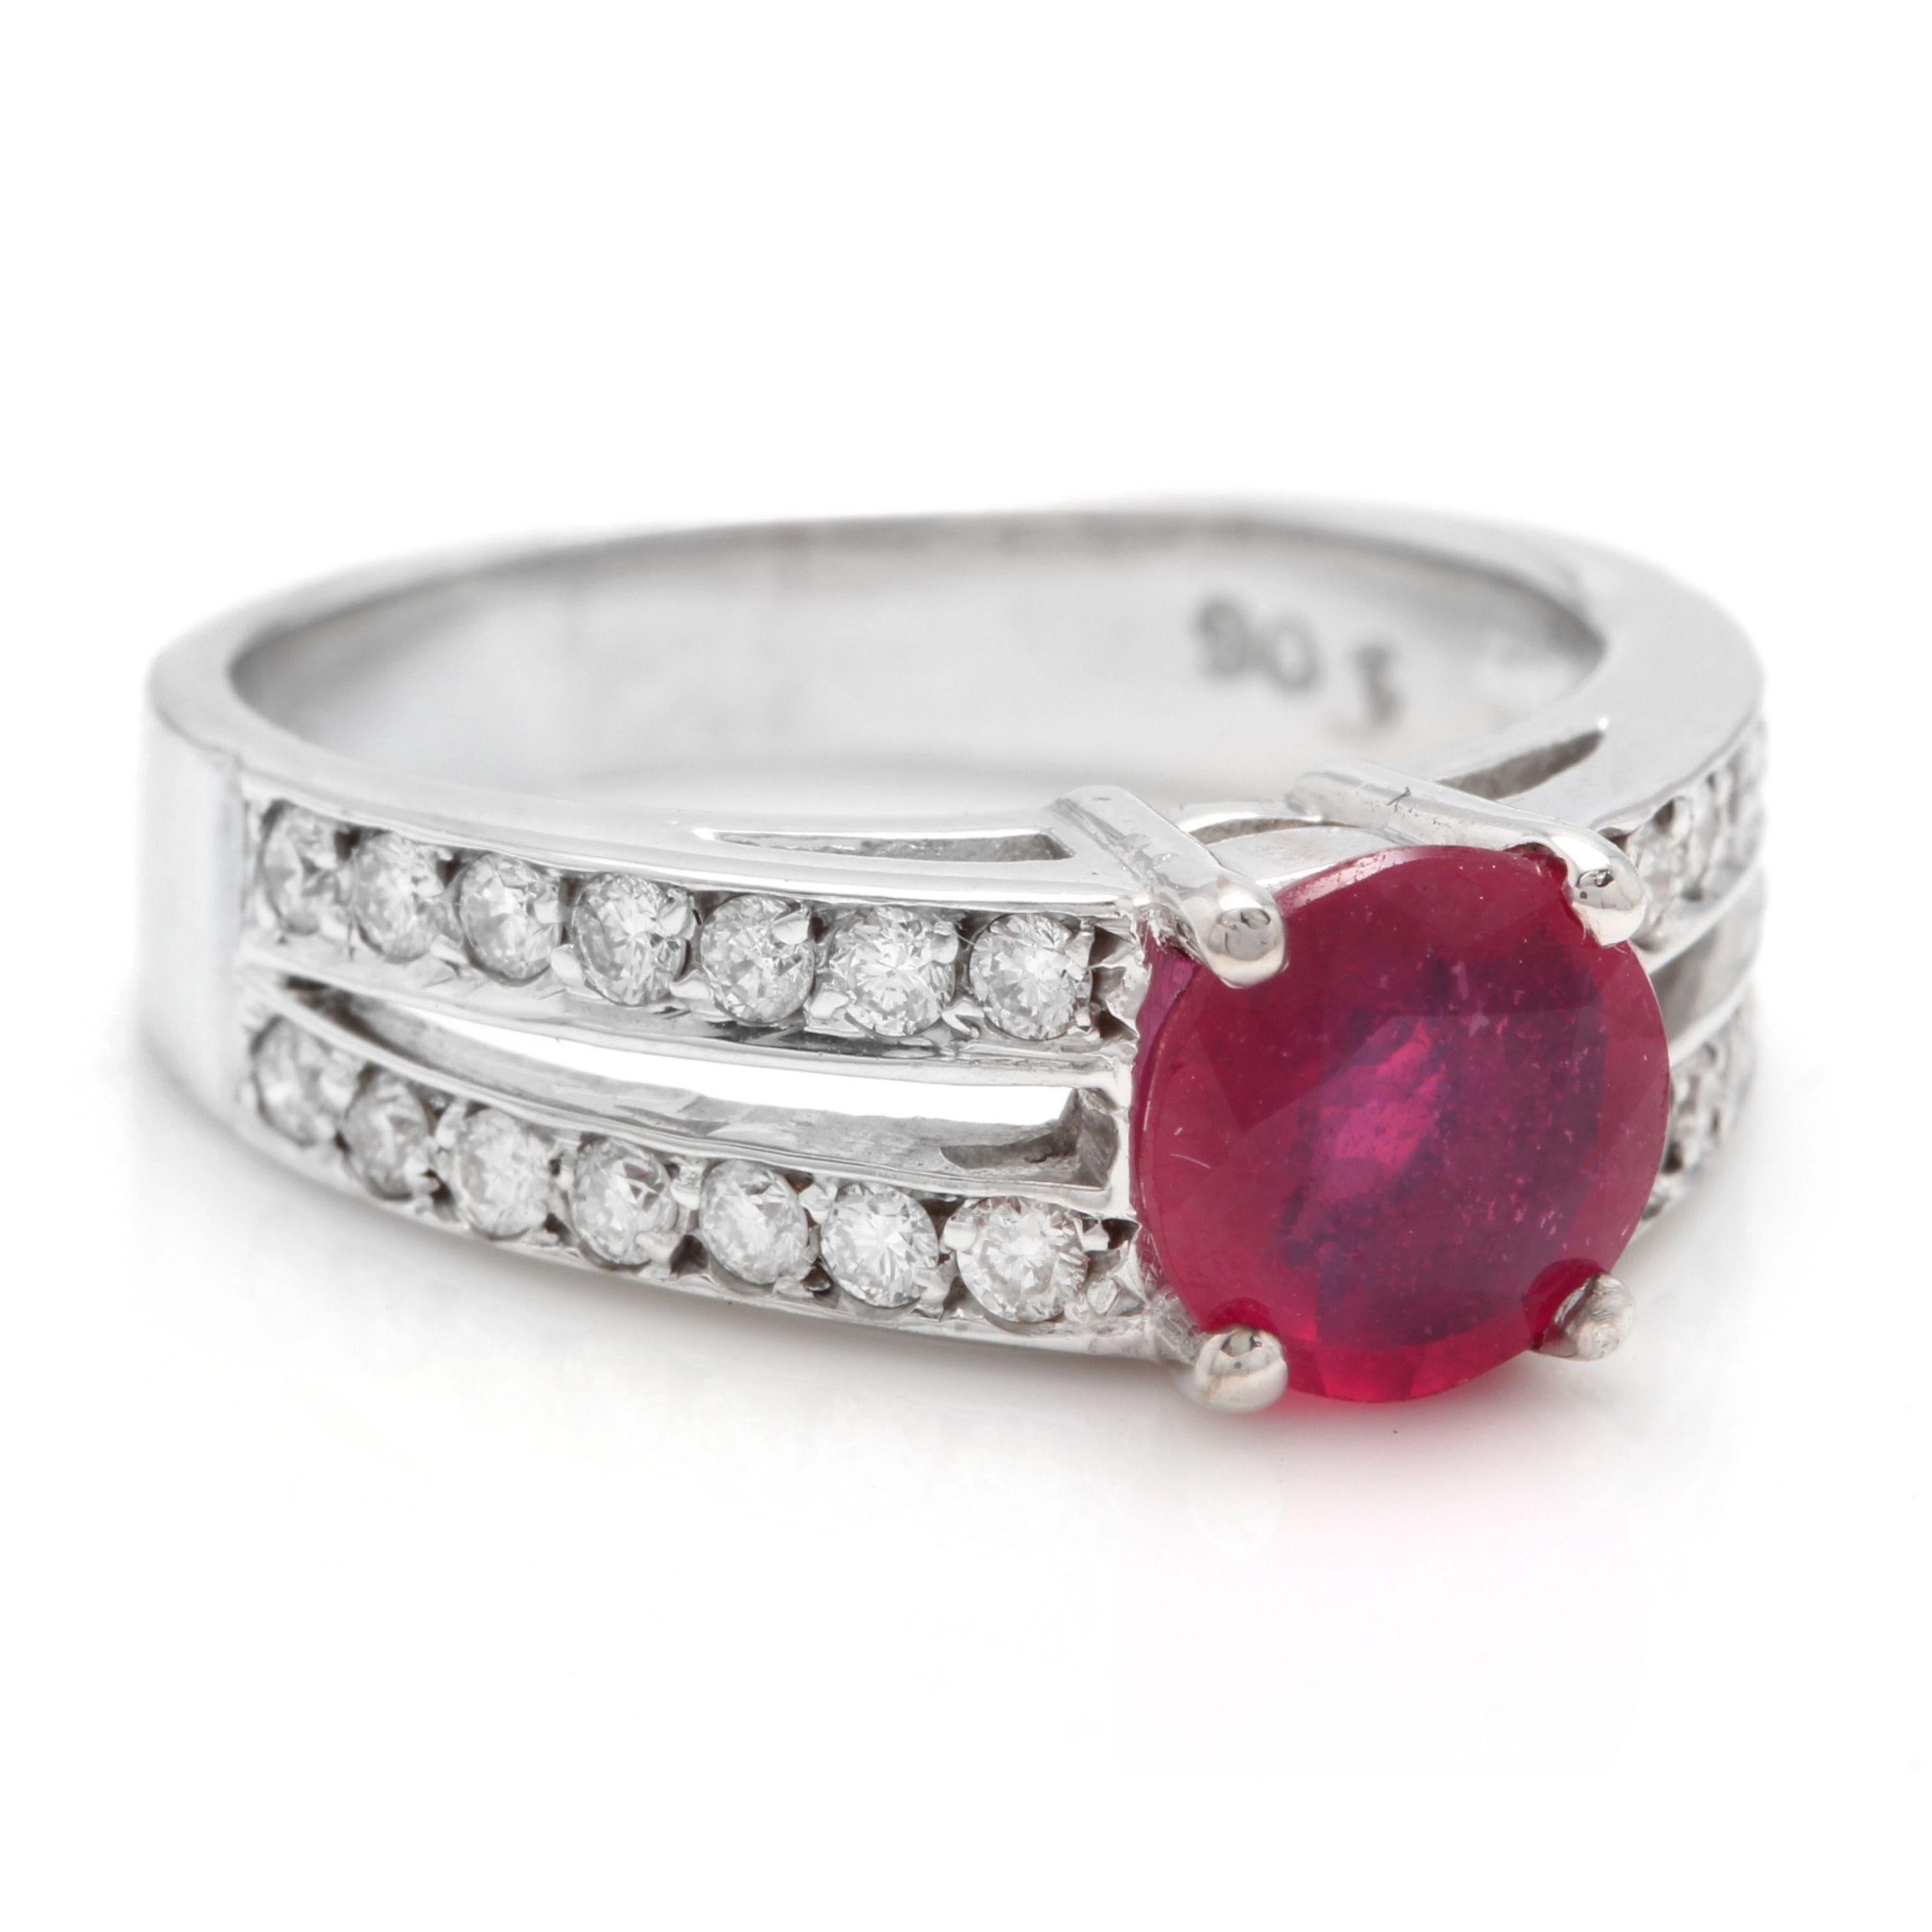 1.60 Carats Impressive Red Ruby and Natural Diamond 14K White Gold Ring

Total Red Ruby Weight is Approx. 1.10 Carats

Ruby Treatment: Lead Glass Filling

Ruby Measures: Approx. 7mm

Natural Round Diamonds Weight: Approx. 0.50 Carats (color G-H /